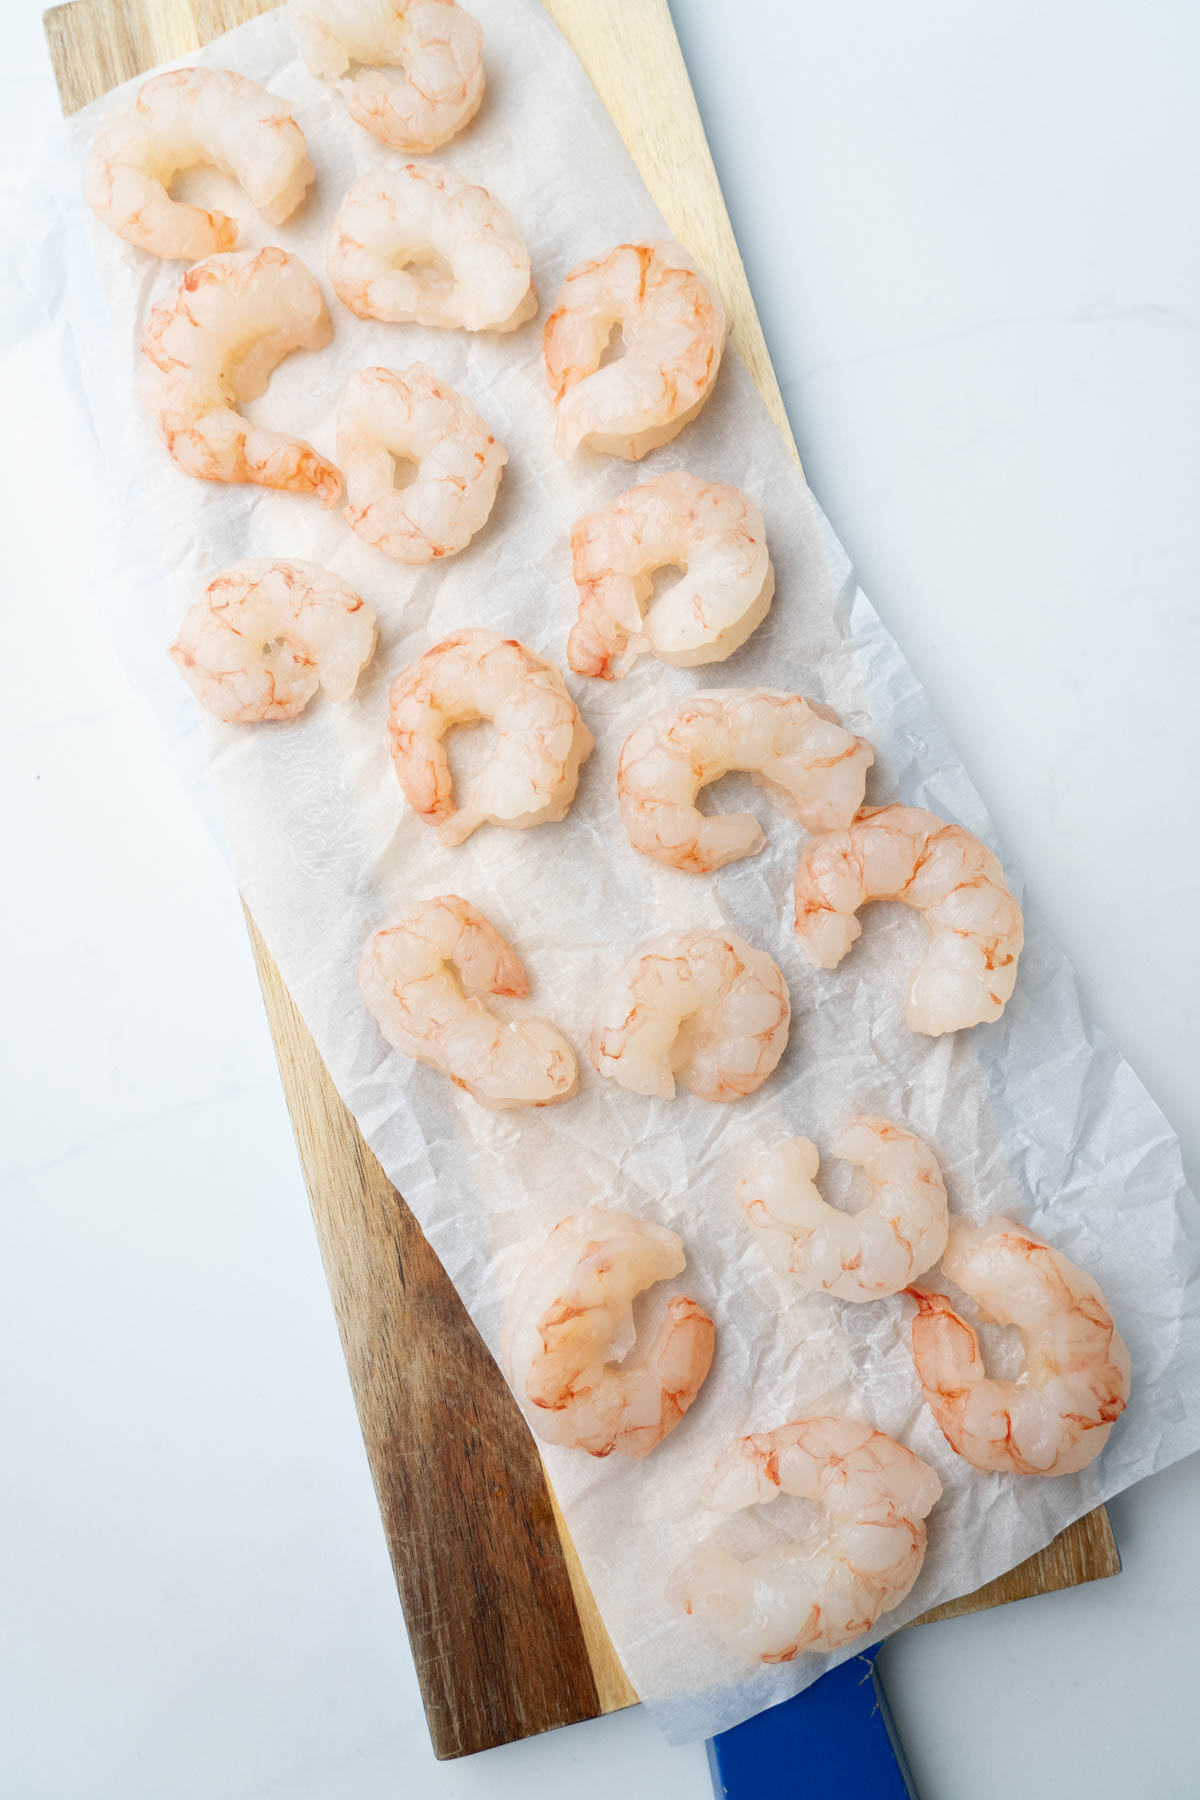 Red argentinian shrimp on a wooden board.